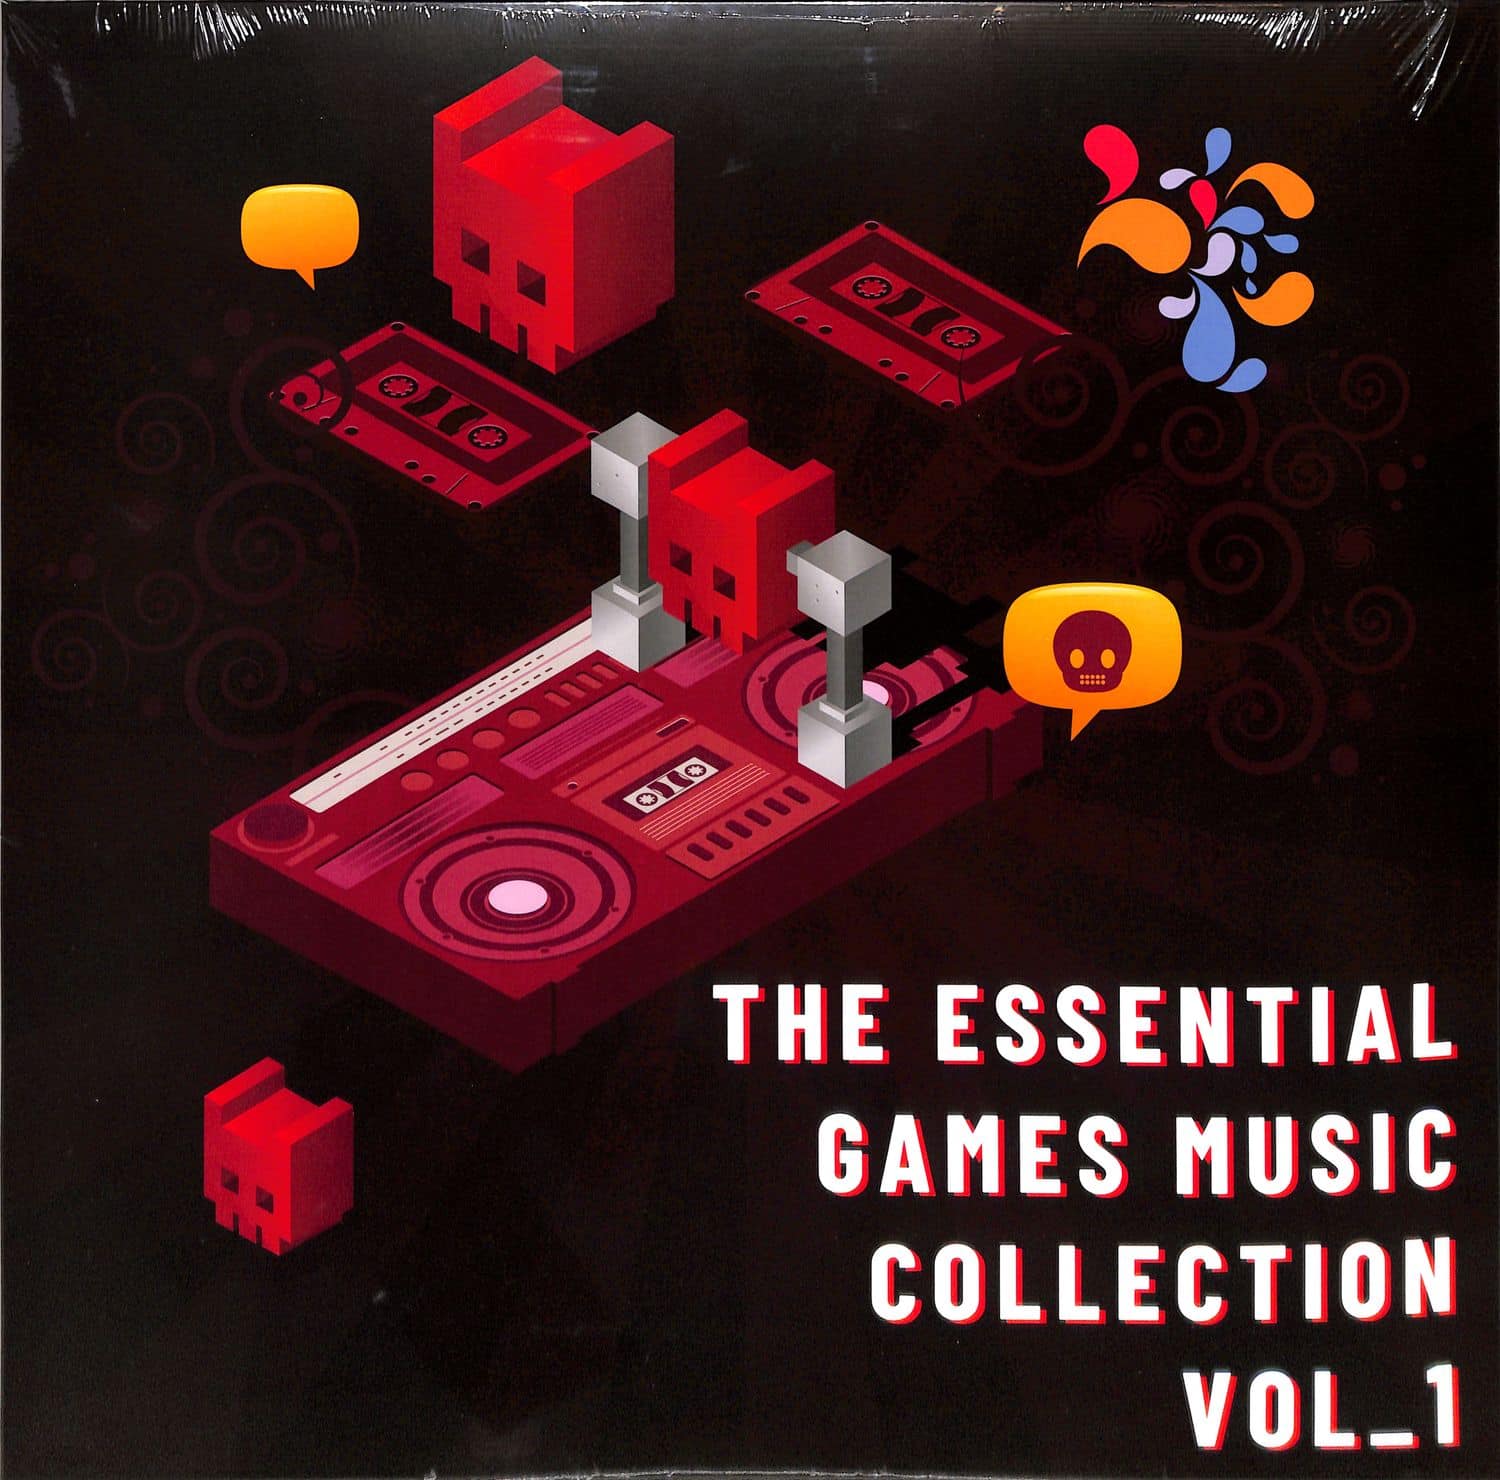 London Music Works - THE ESSENTIAL GAMES MUSIC COLLECTION VOL.1 